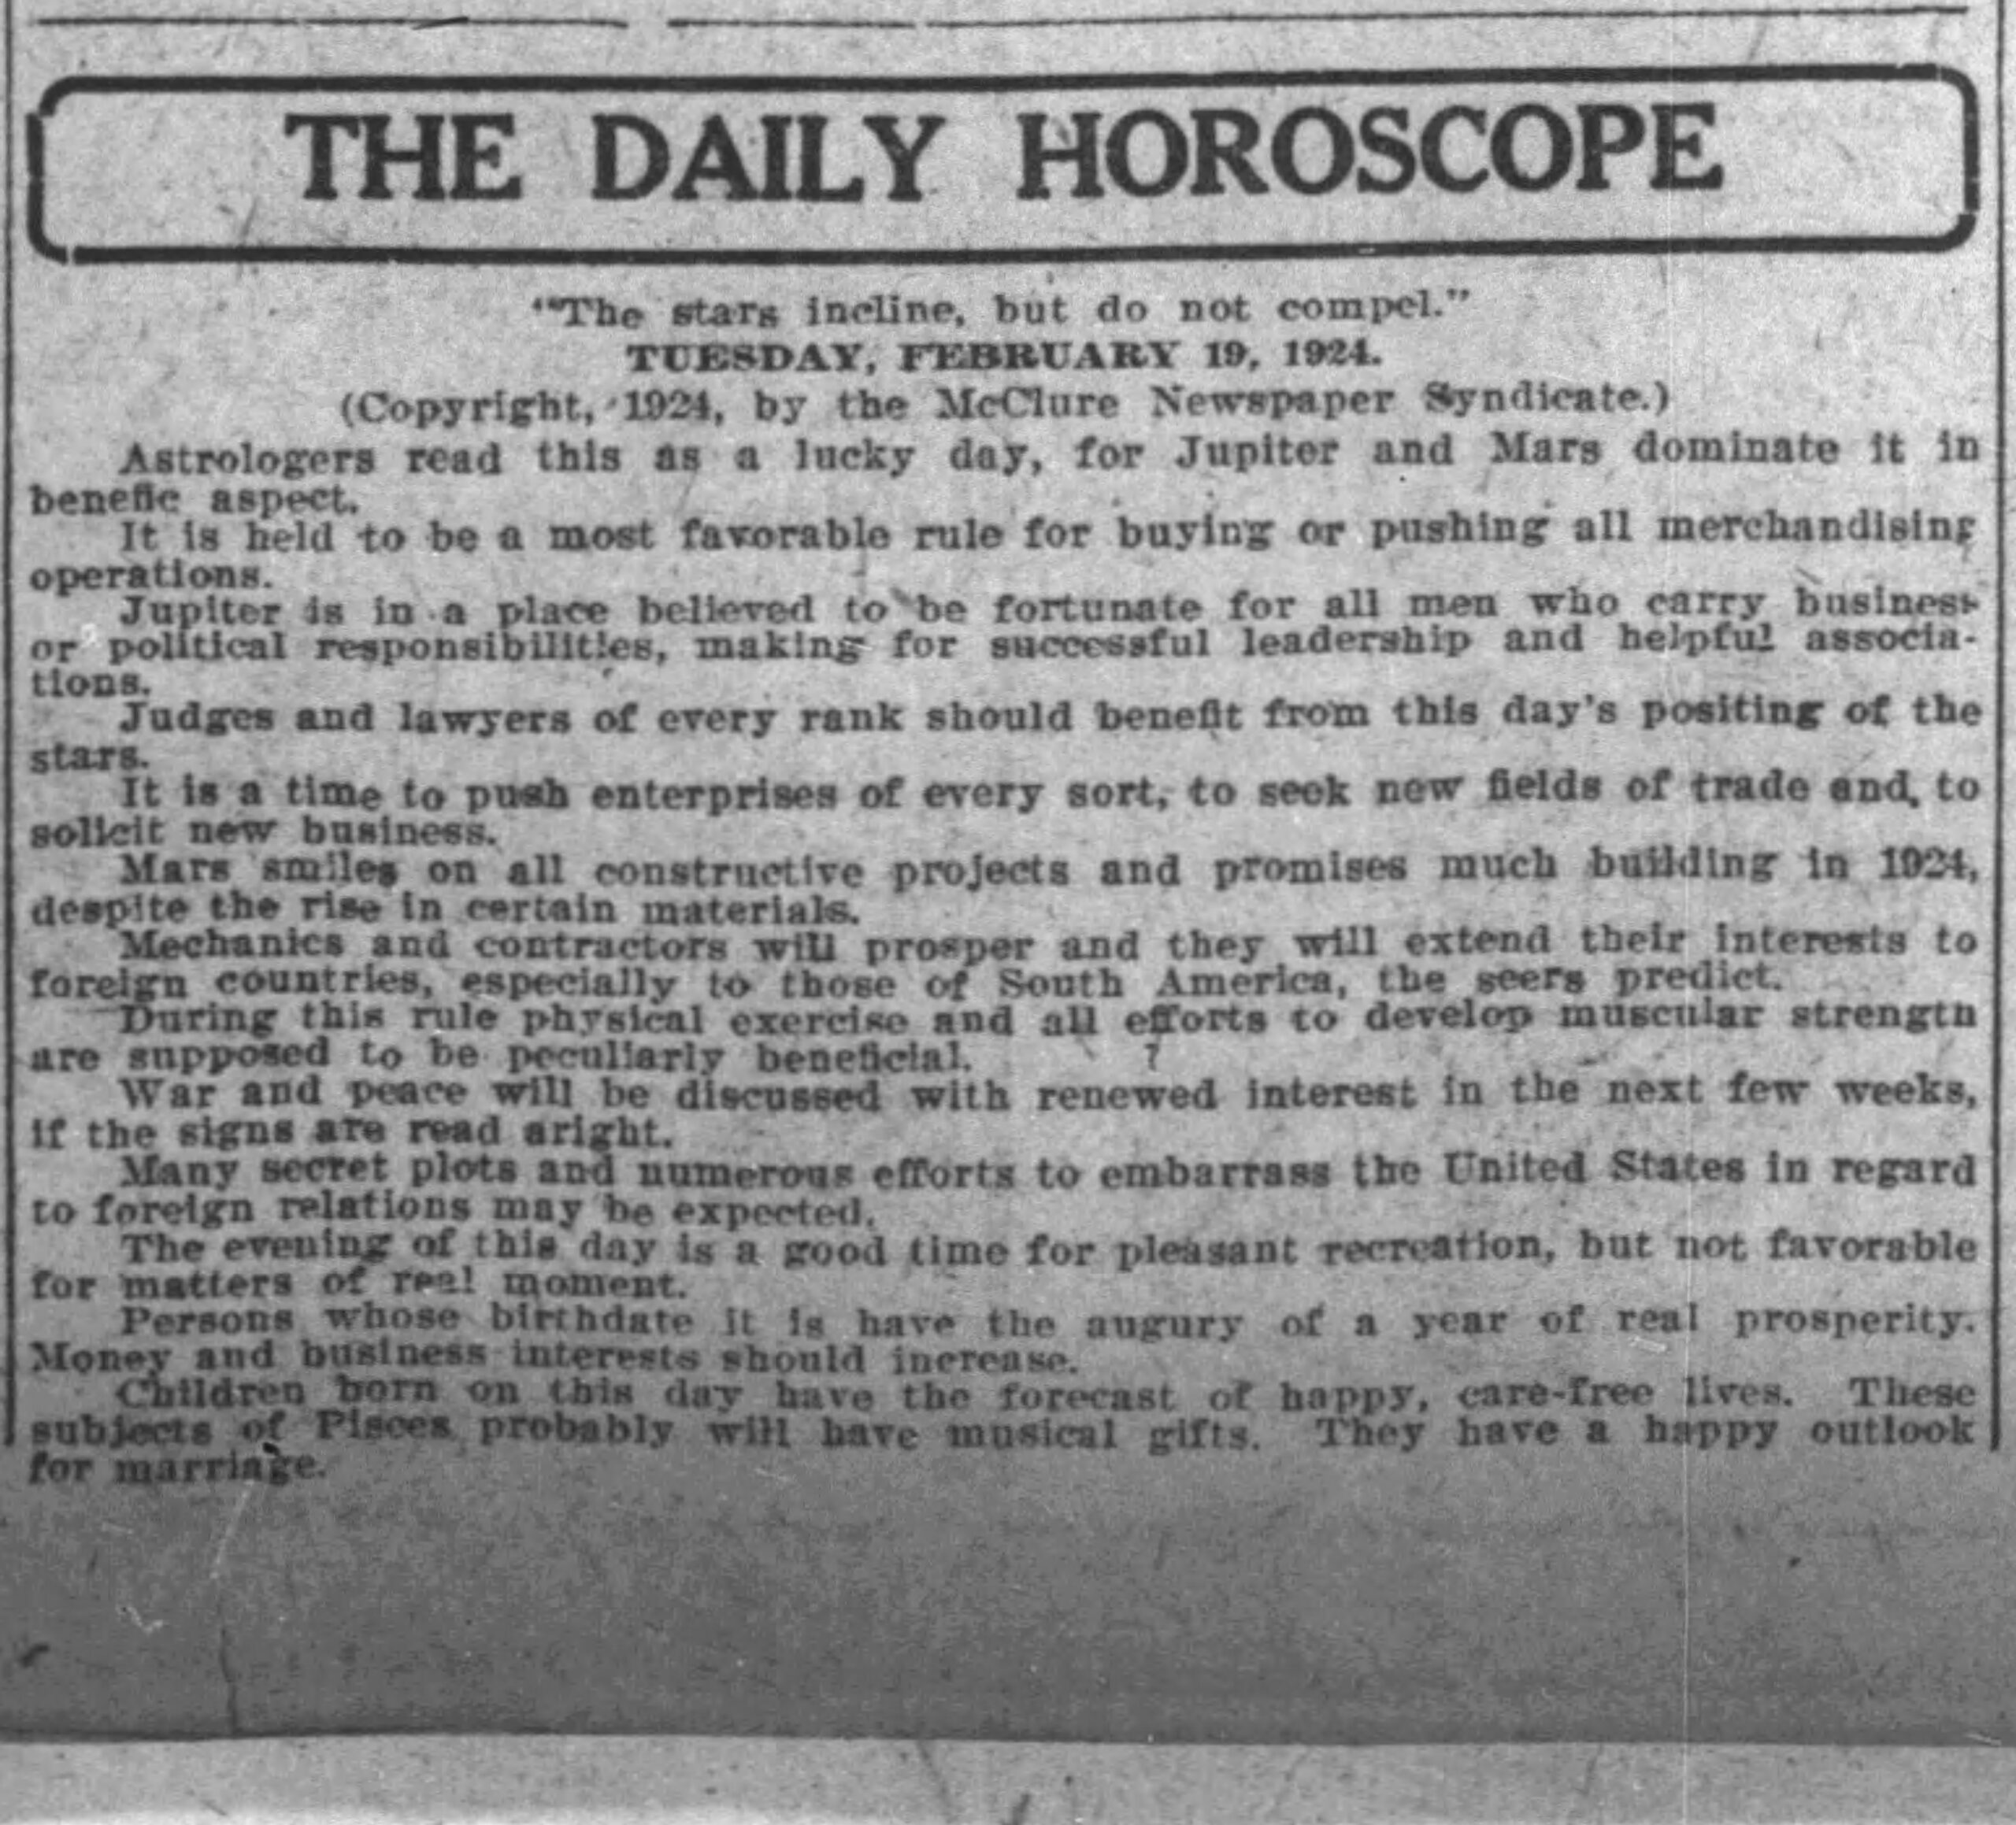 News from February 18, 1924